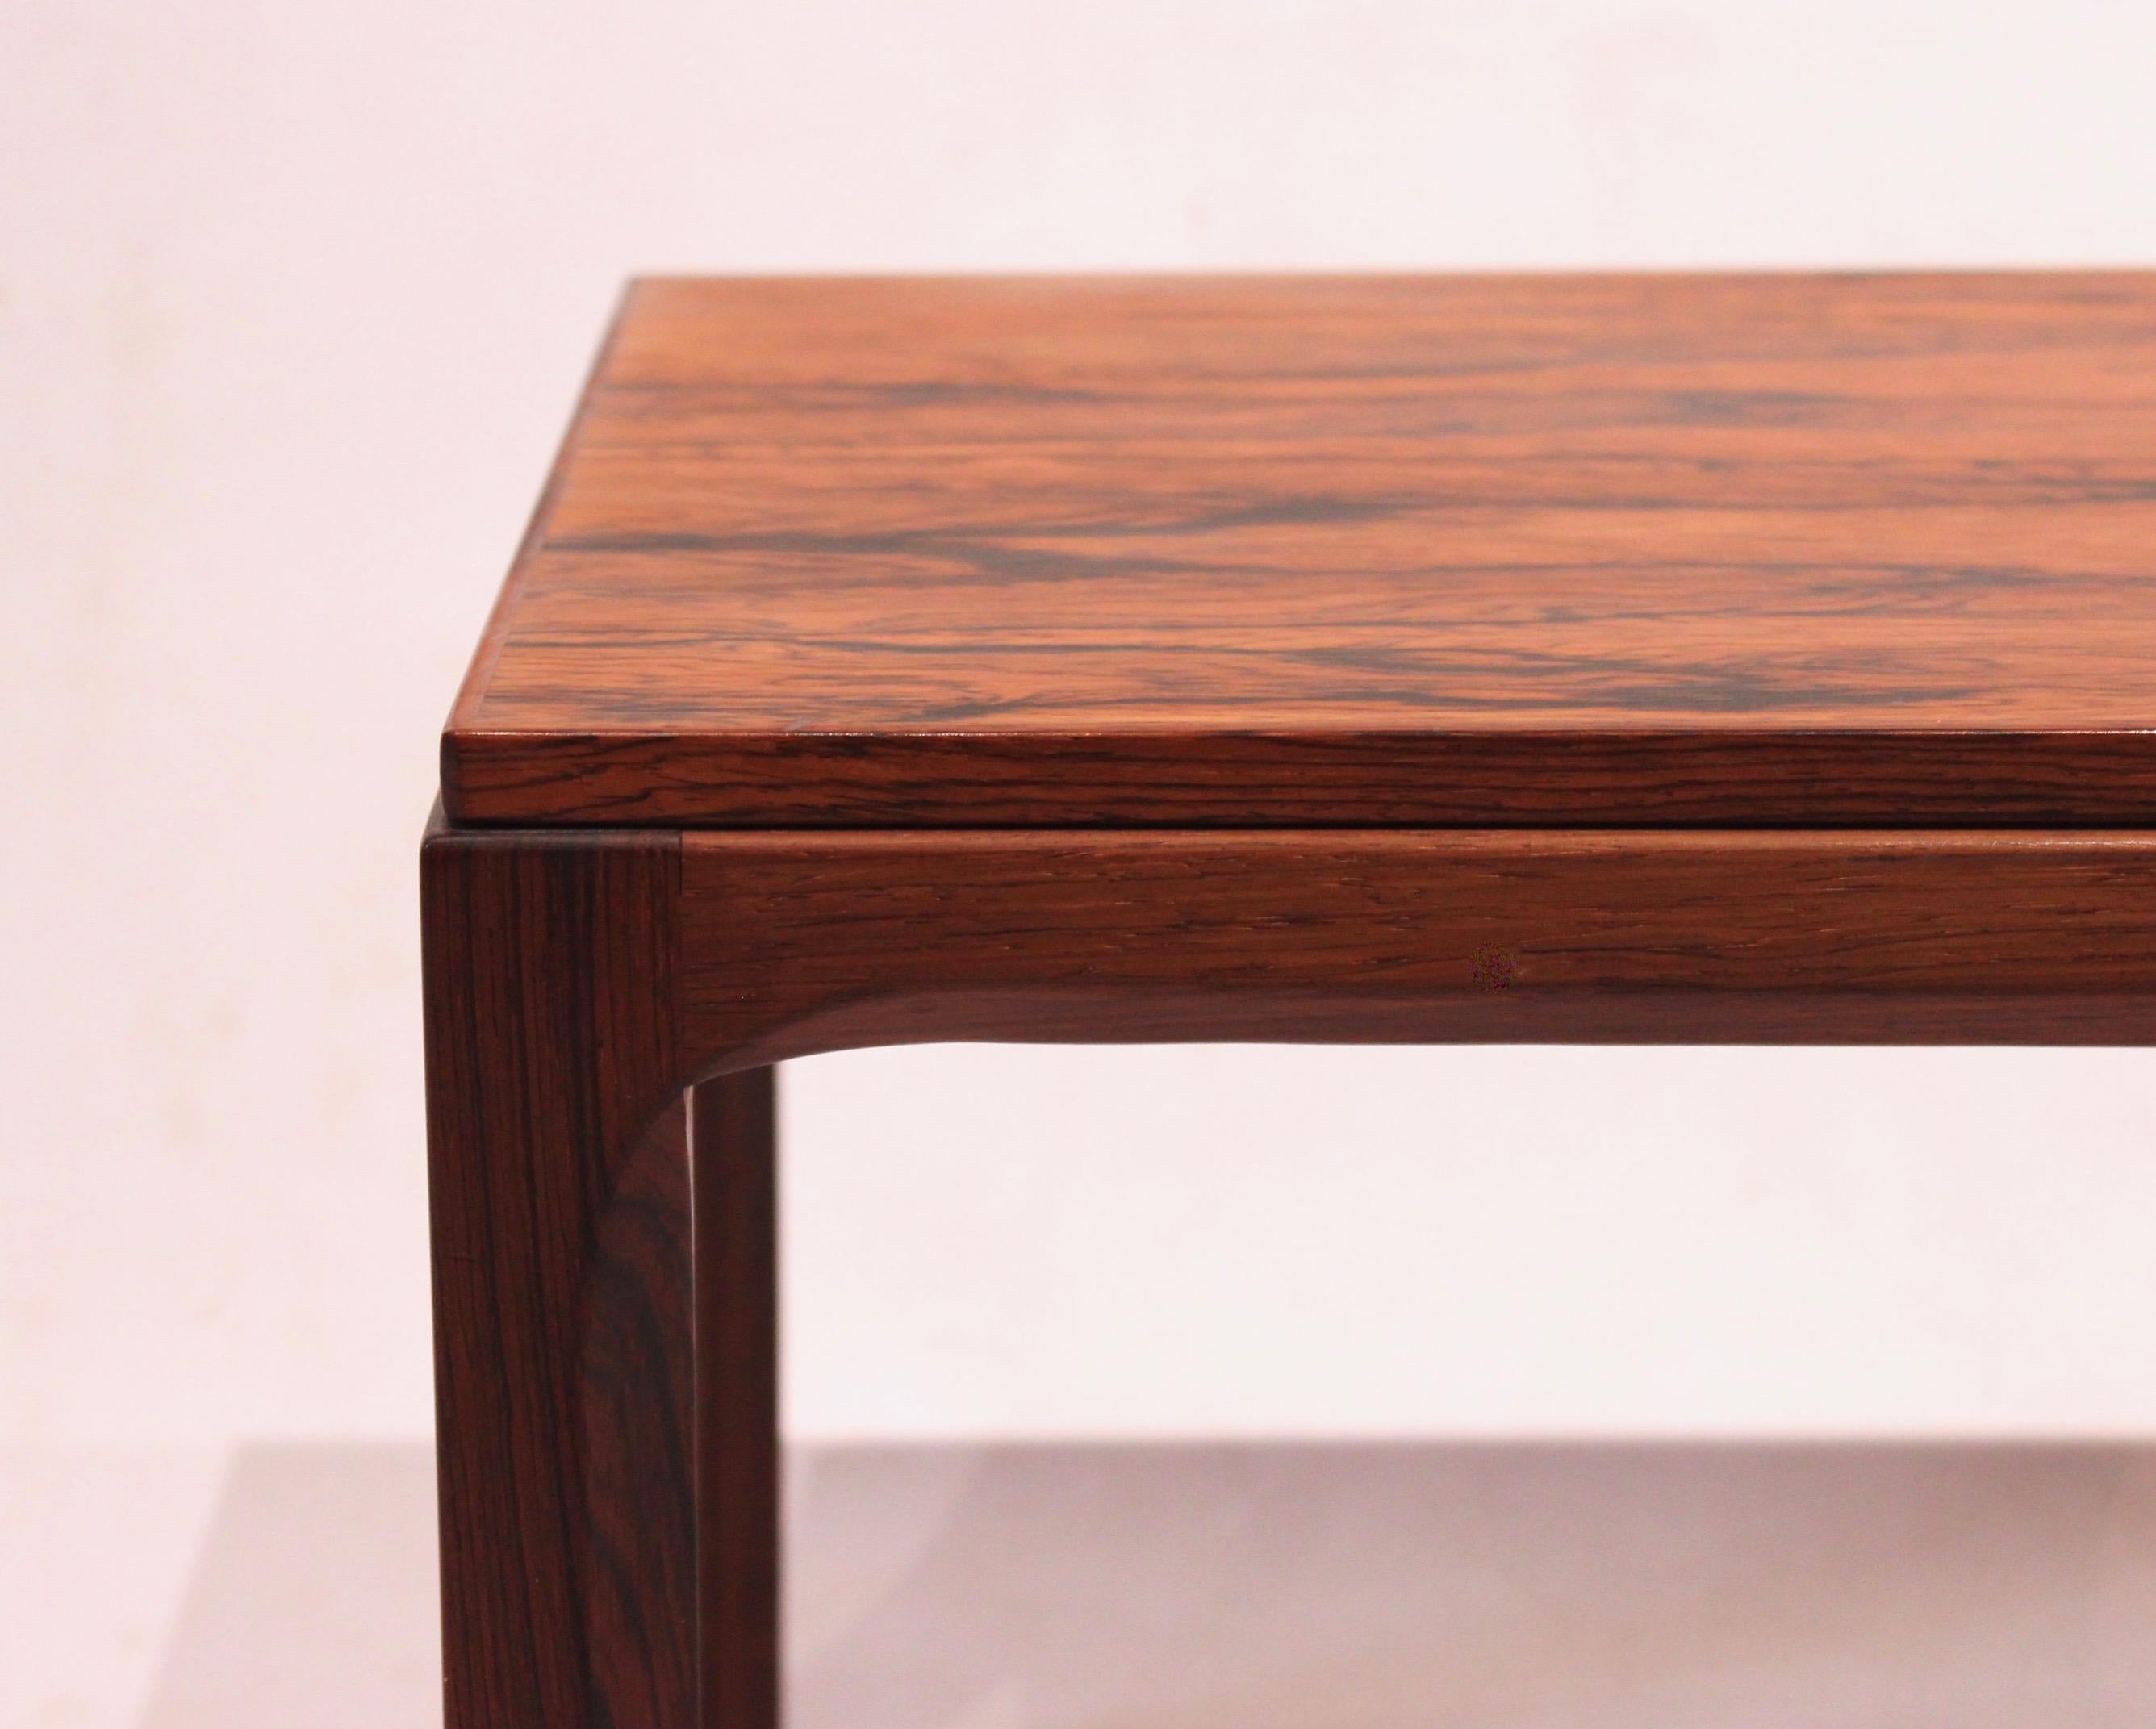 Mid-Century Modern Side Table Made In Rosewood By Aksel Kjersgaard Made By Odder From 1960s For Sale